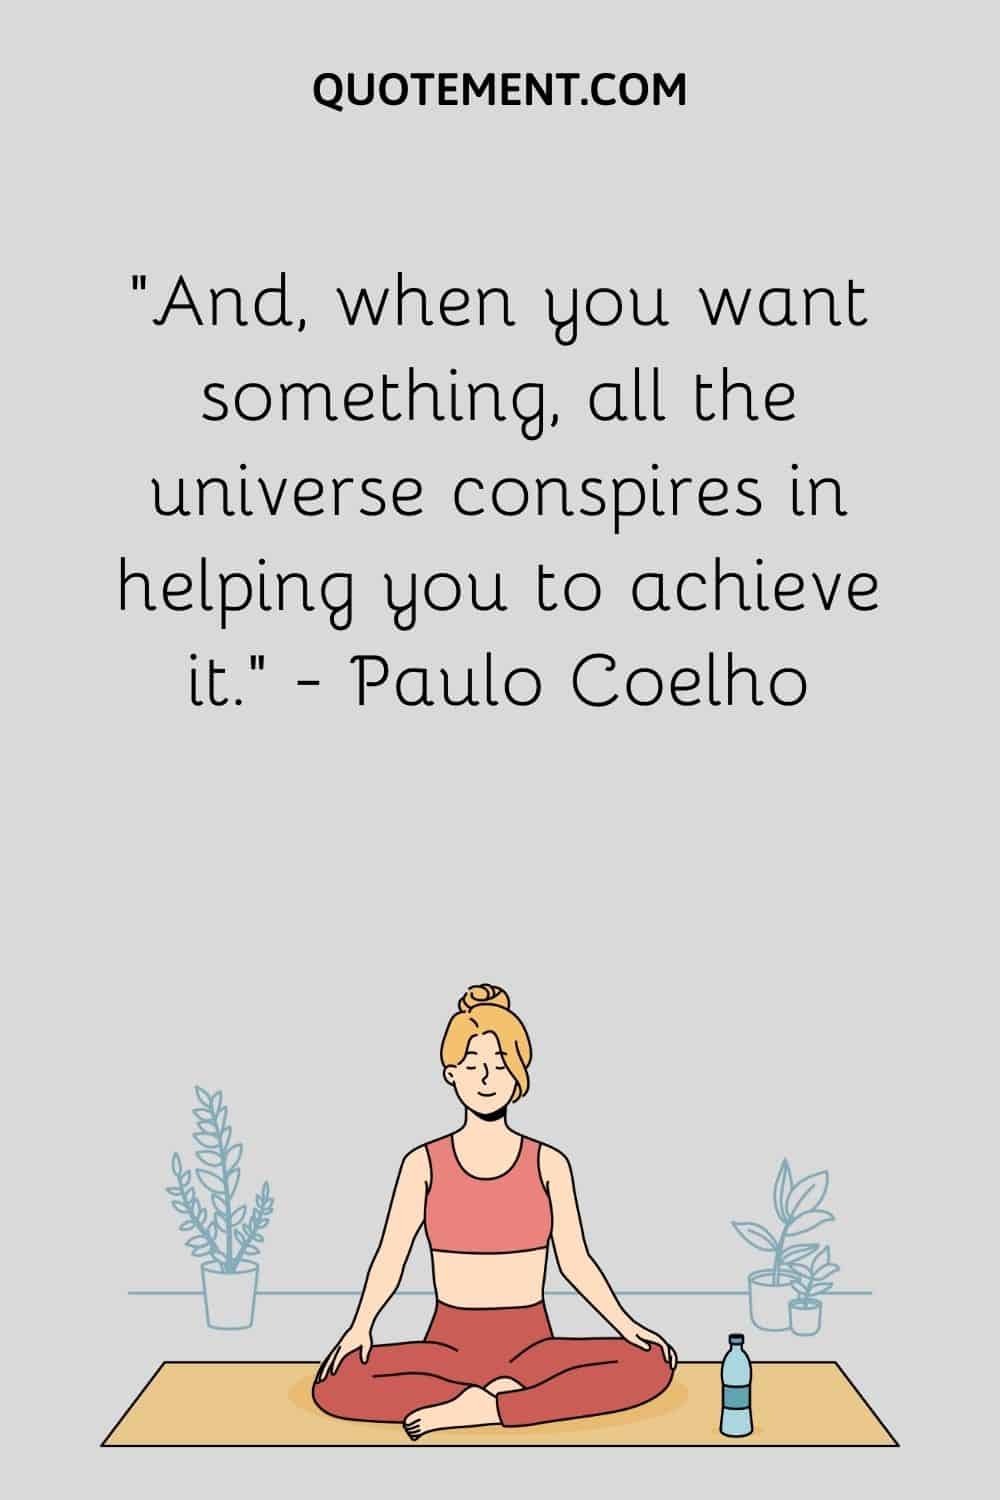 And, when you want something, all the universe conspires in helping you to achieve it